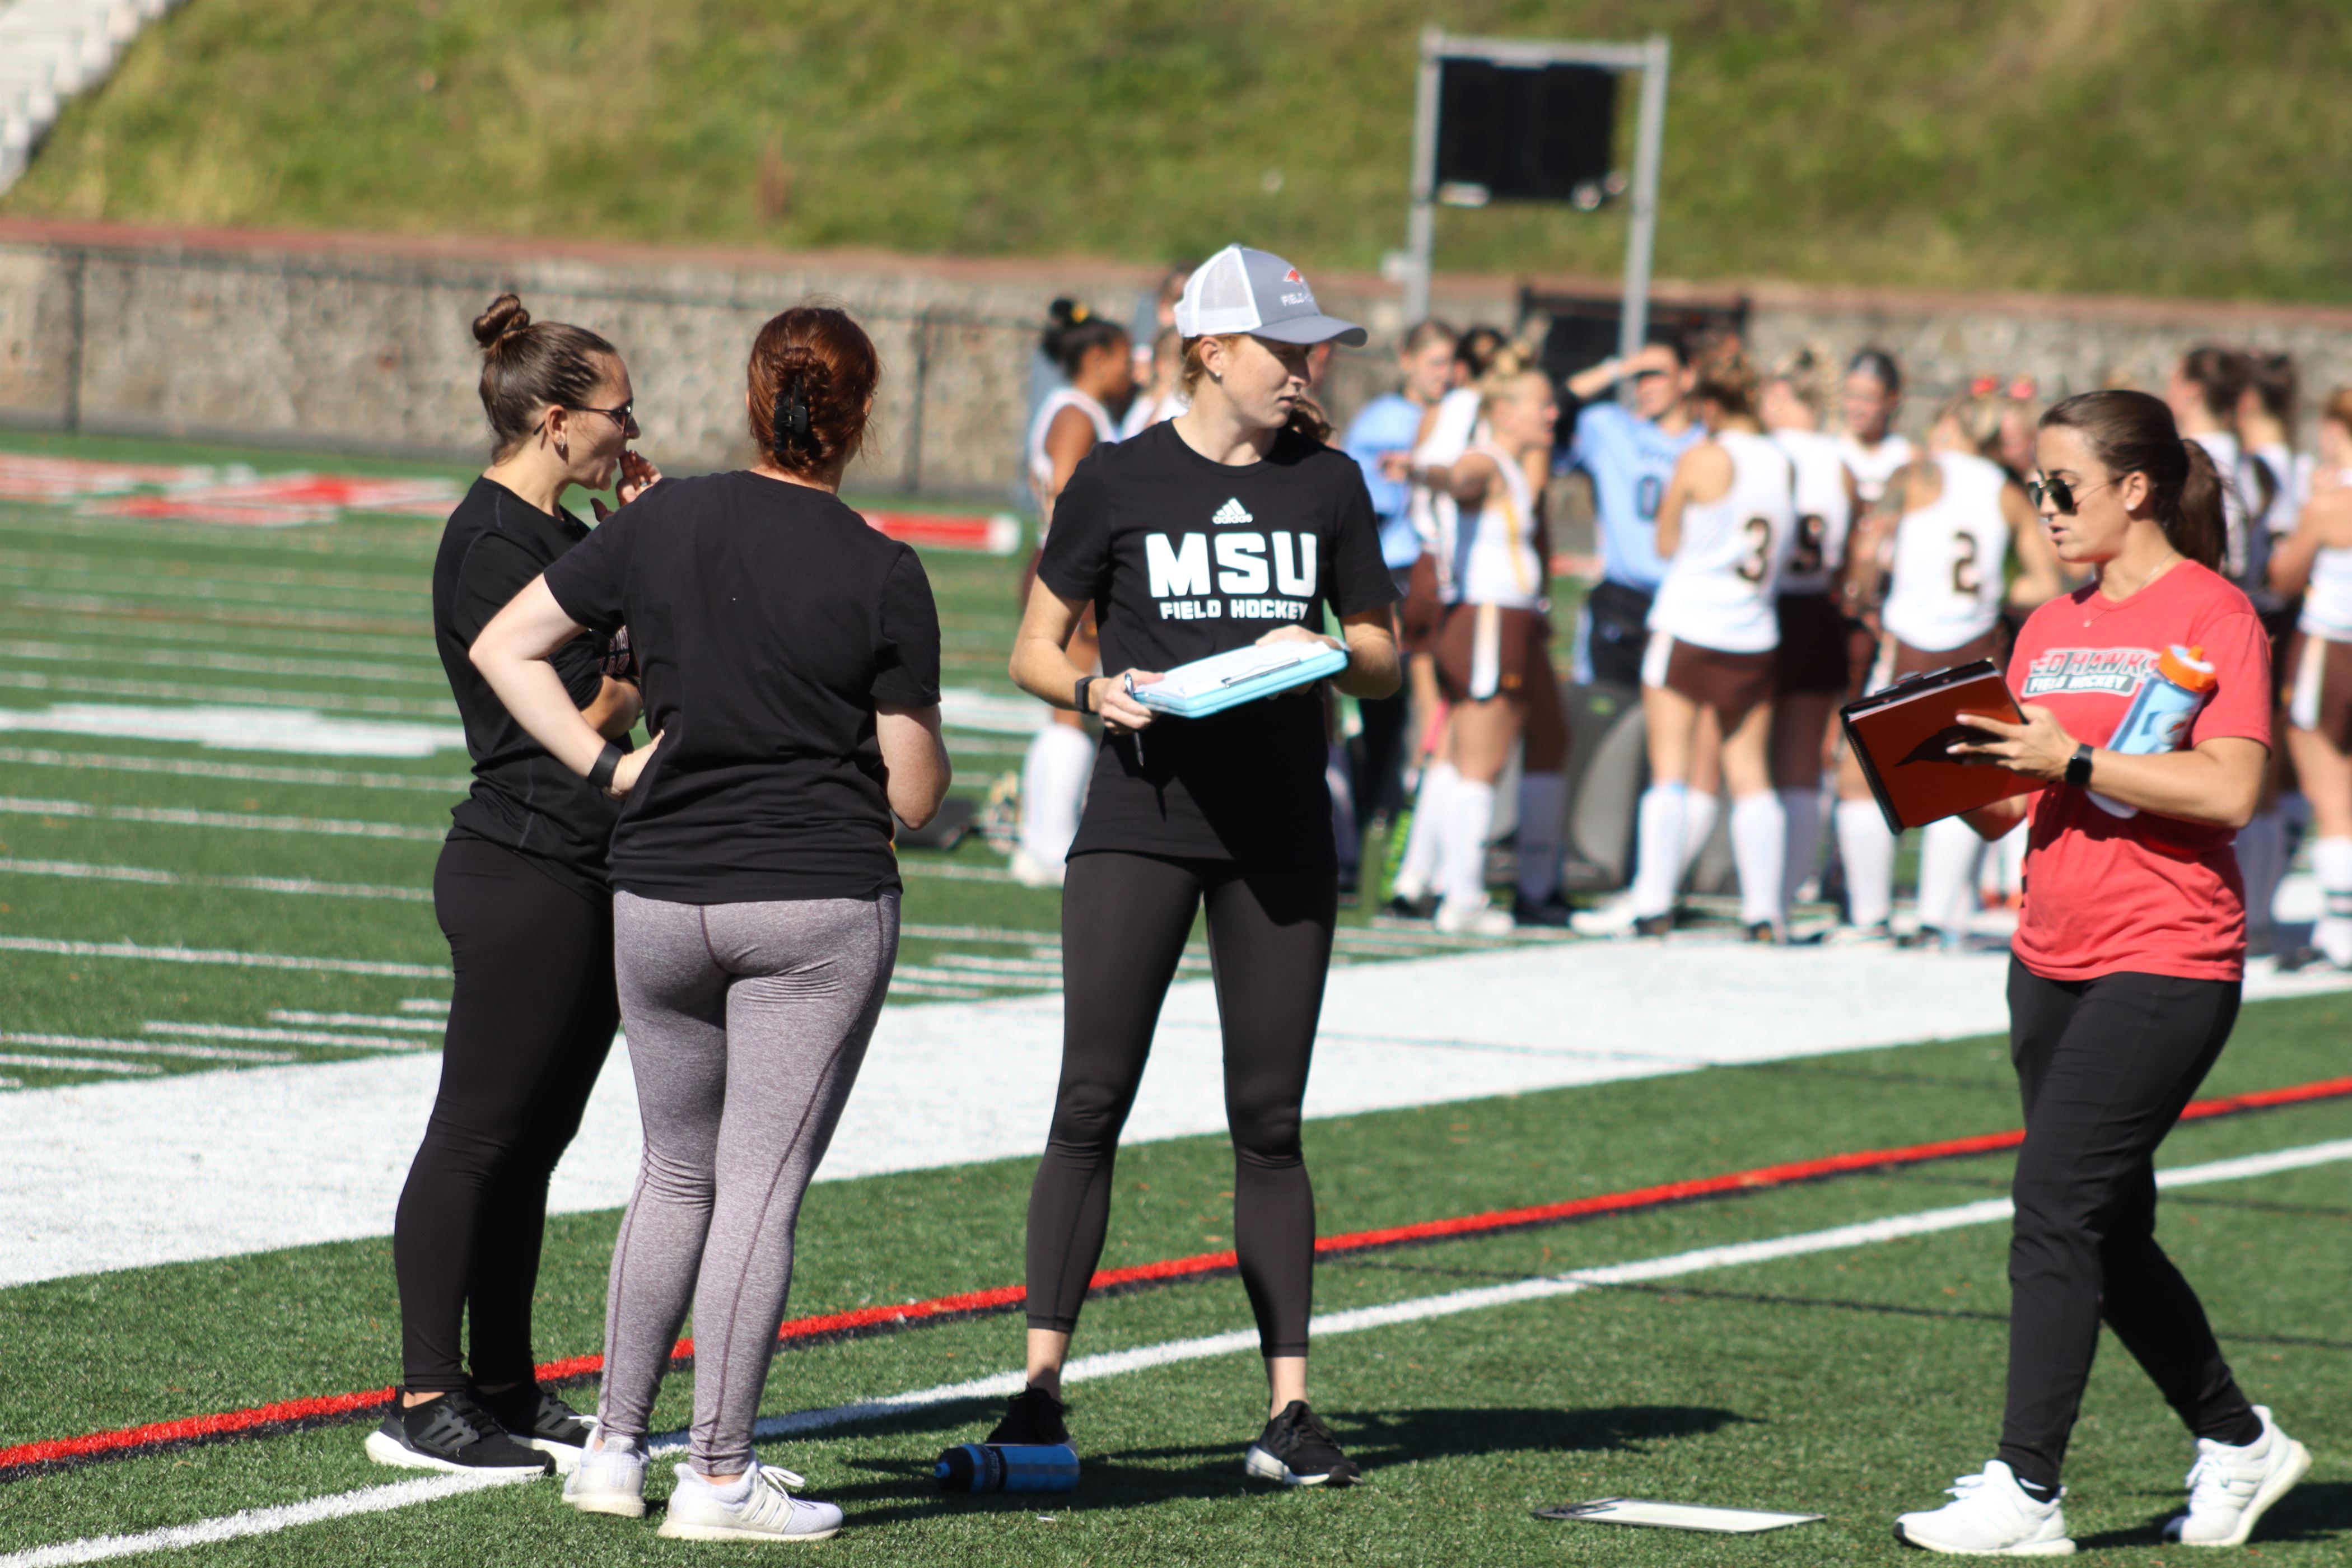 Head coach Eileen O'Reilly (middle) harped on how preseason preparation and fitness improvements are important for the team, Trevor Giesberg | The Montclarion